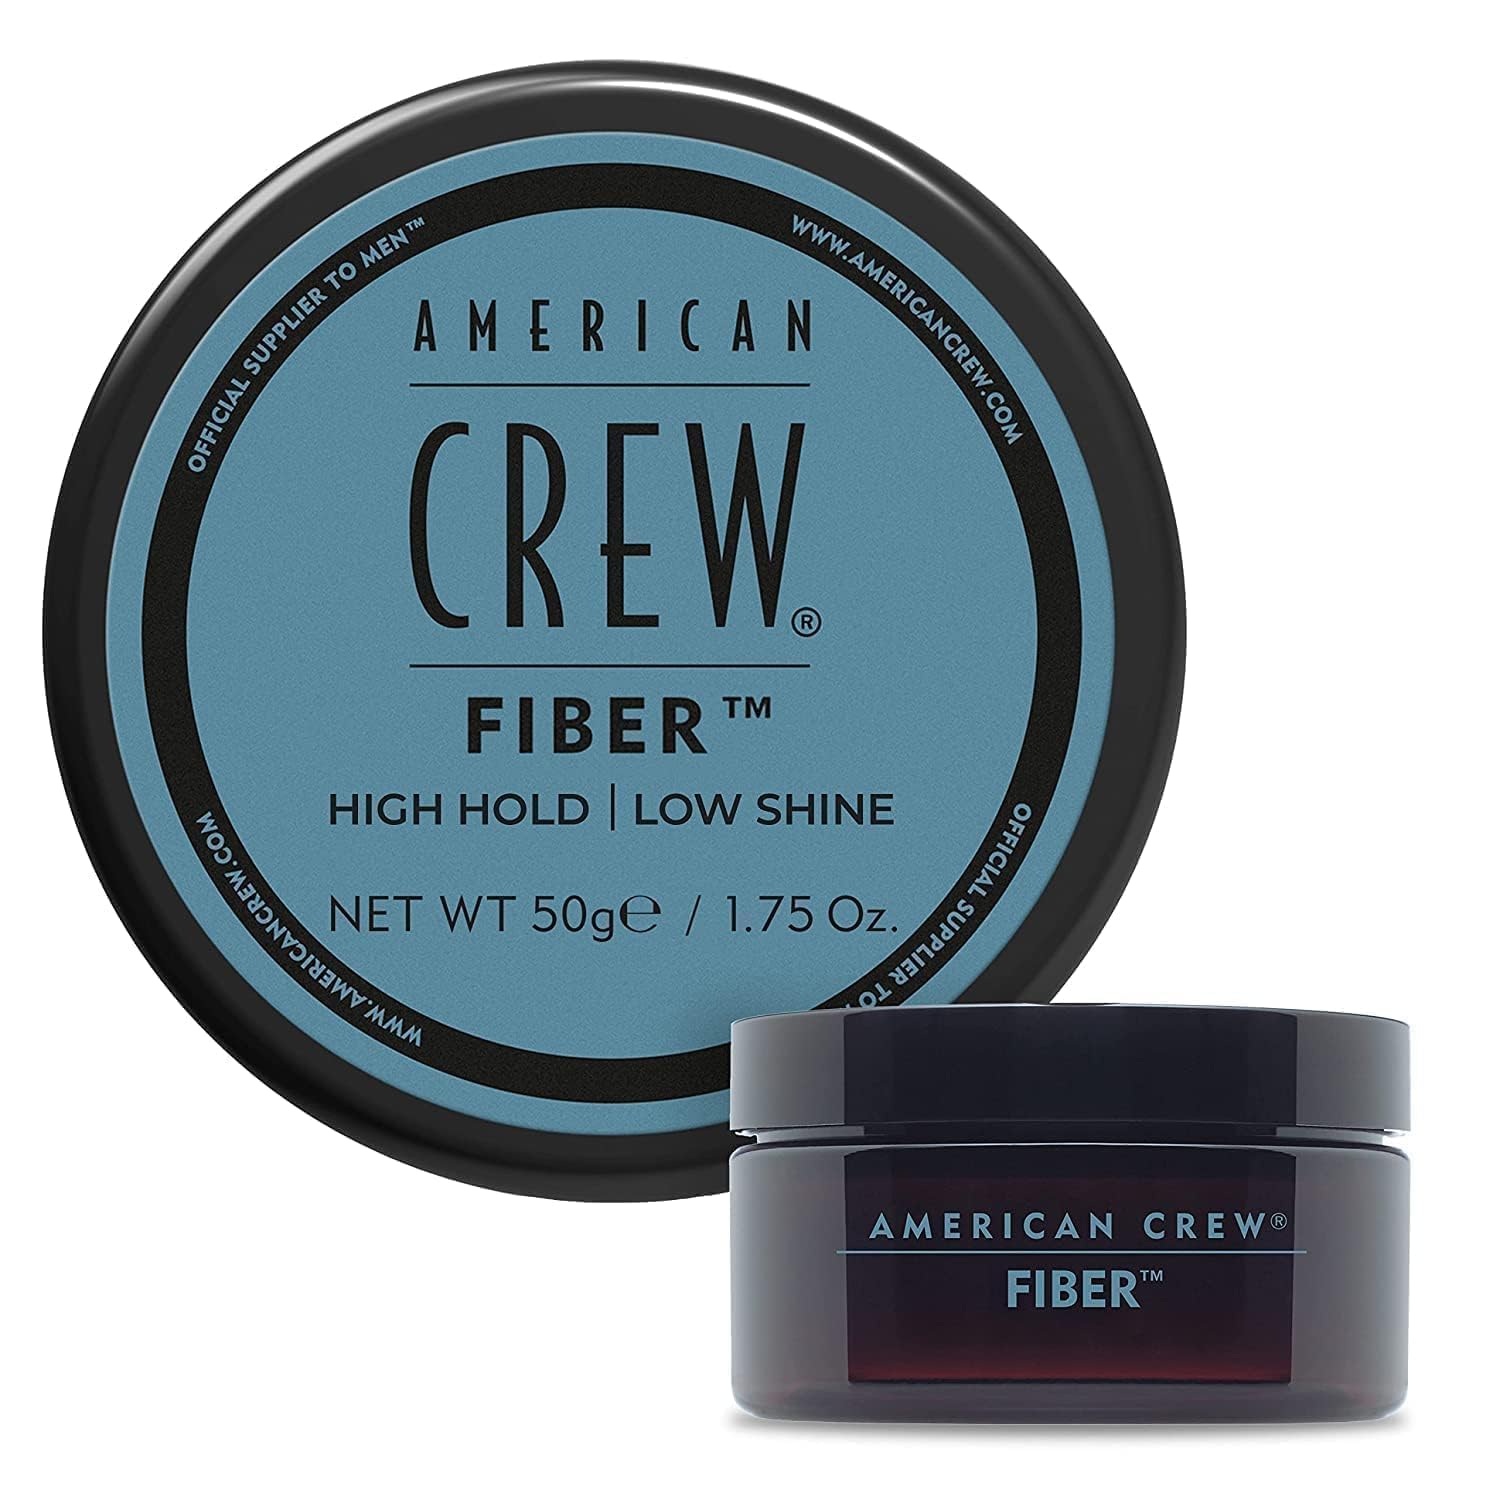 AMERICAN CREW Men's Hair Fiber (OLD VERSION), Like Hair Gel with High Hold with Low Shine, 1.75 Oz (Pack of 1)